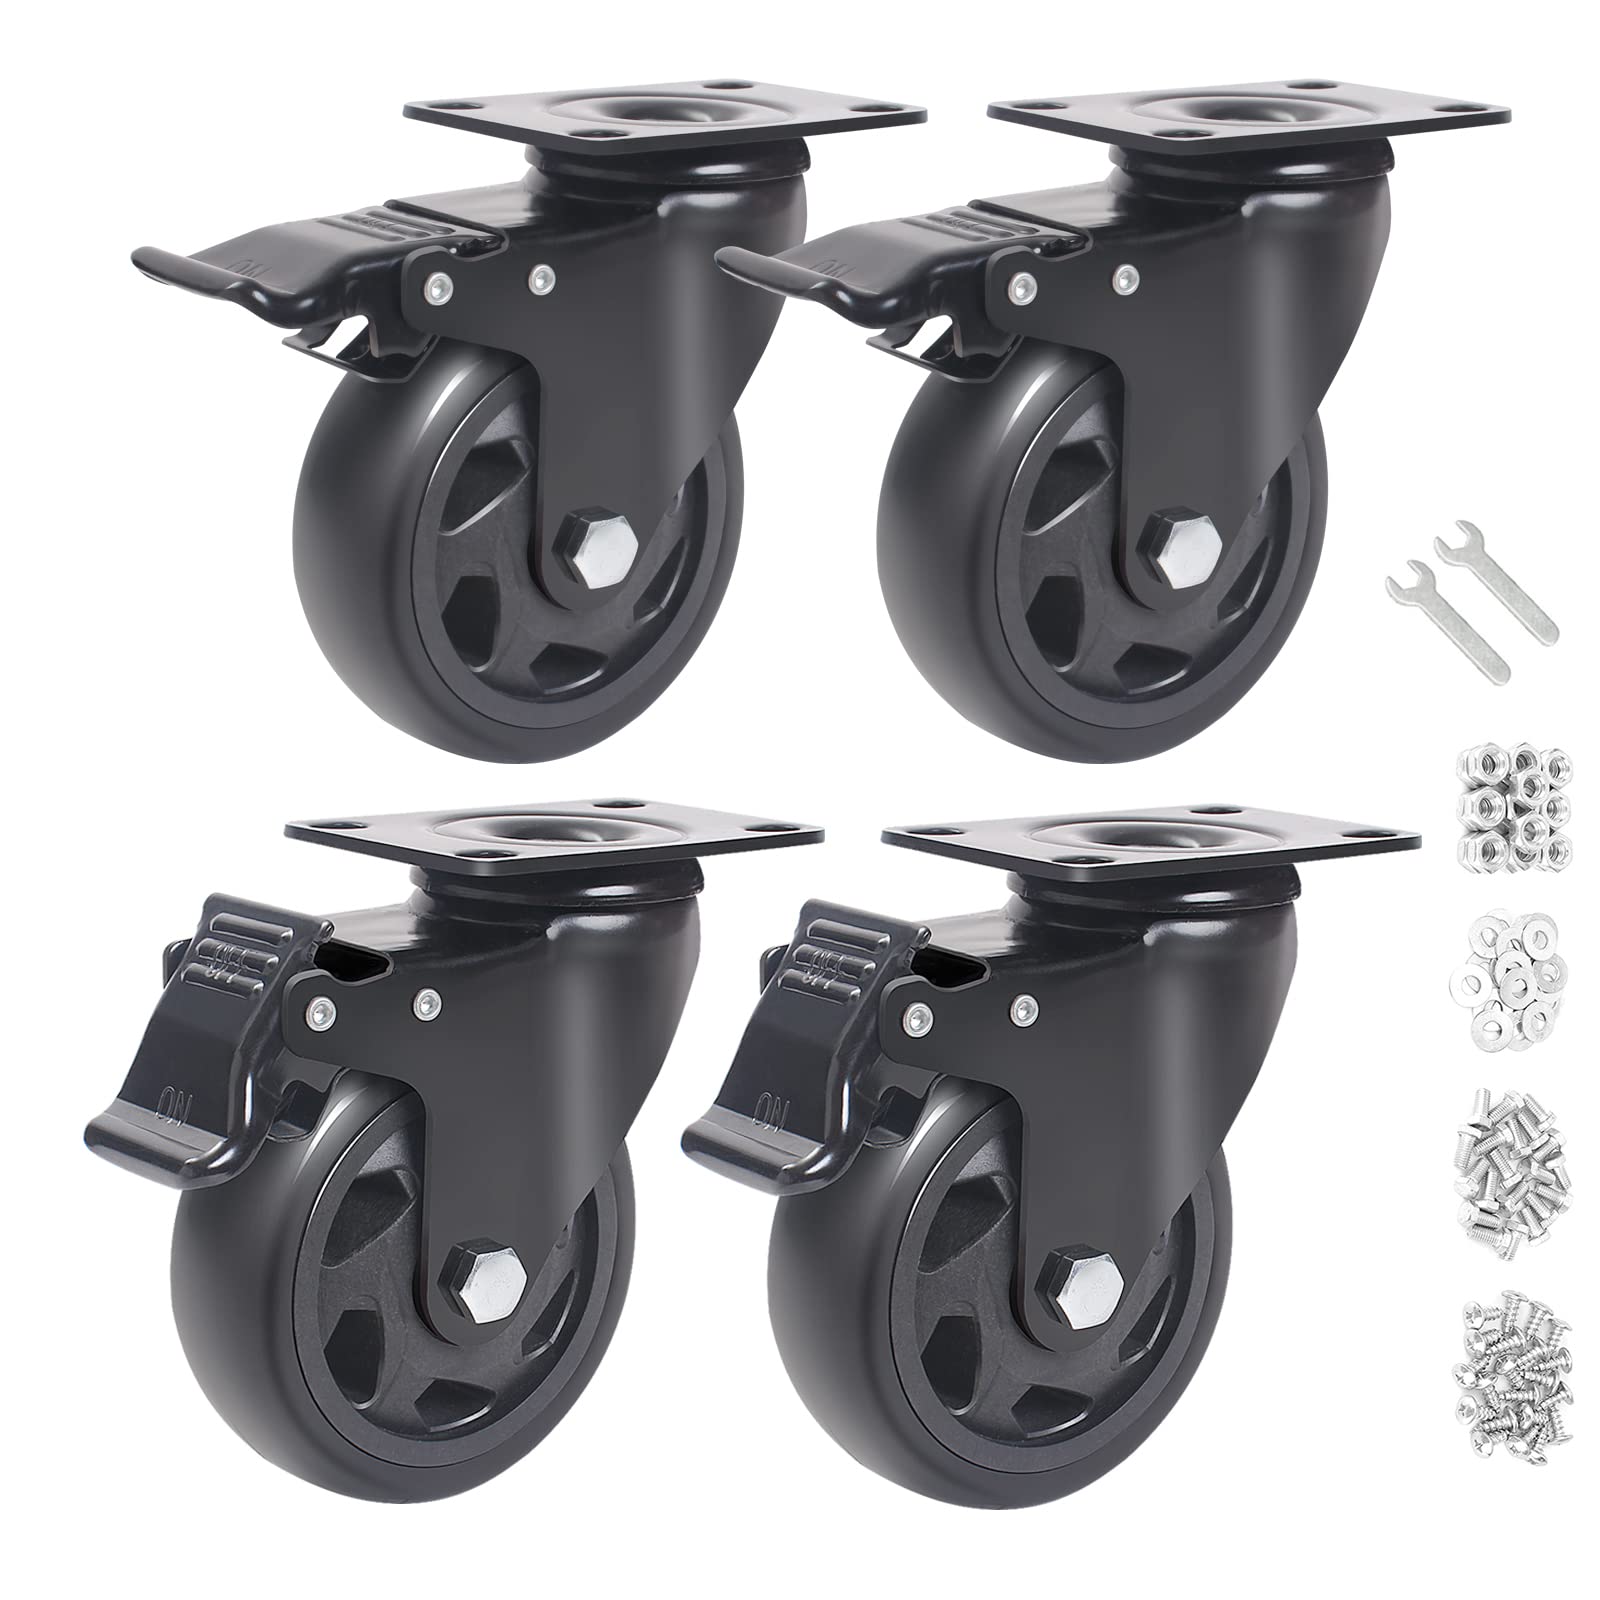 YAEMIKY 4 Swivel caster Wheels, casters Set of 4,Heavy Duty casters with Brake,Premium Dual Locking castors with 360 Degree Rota